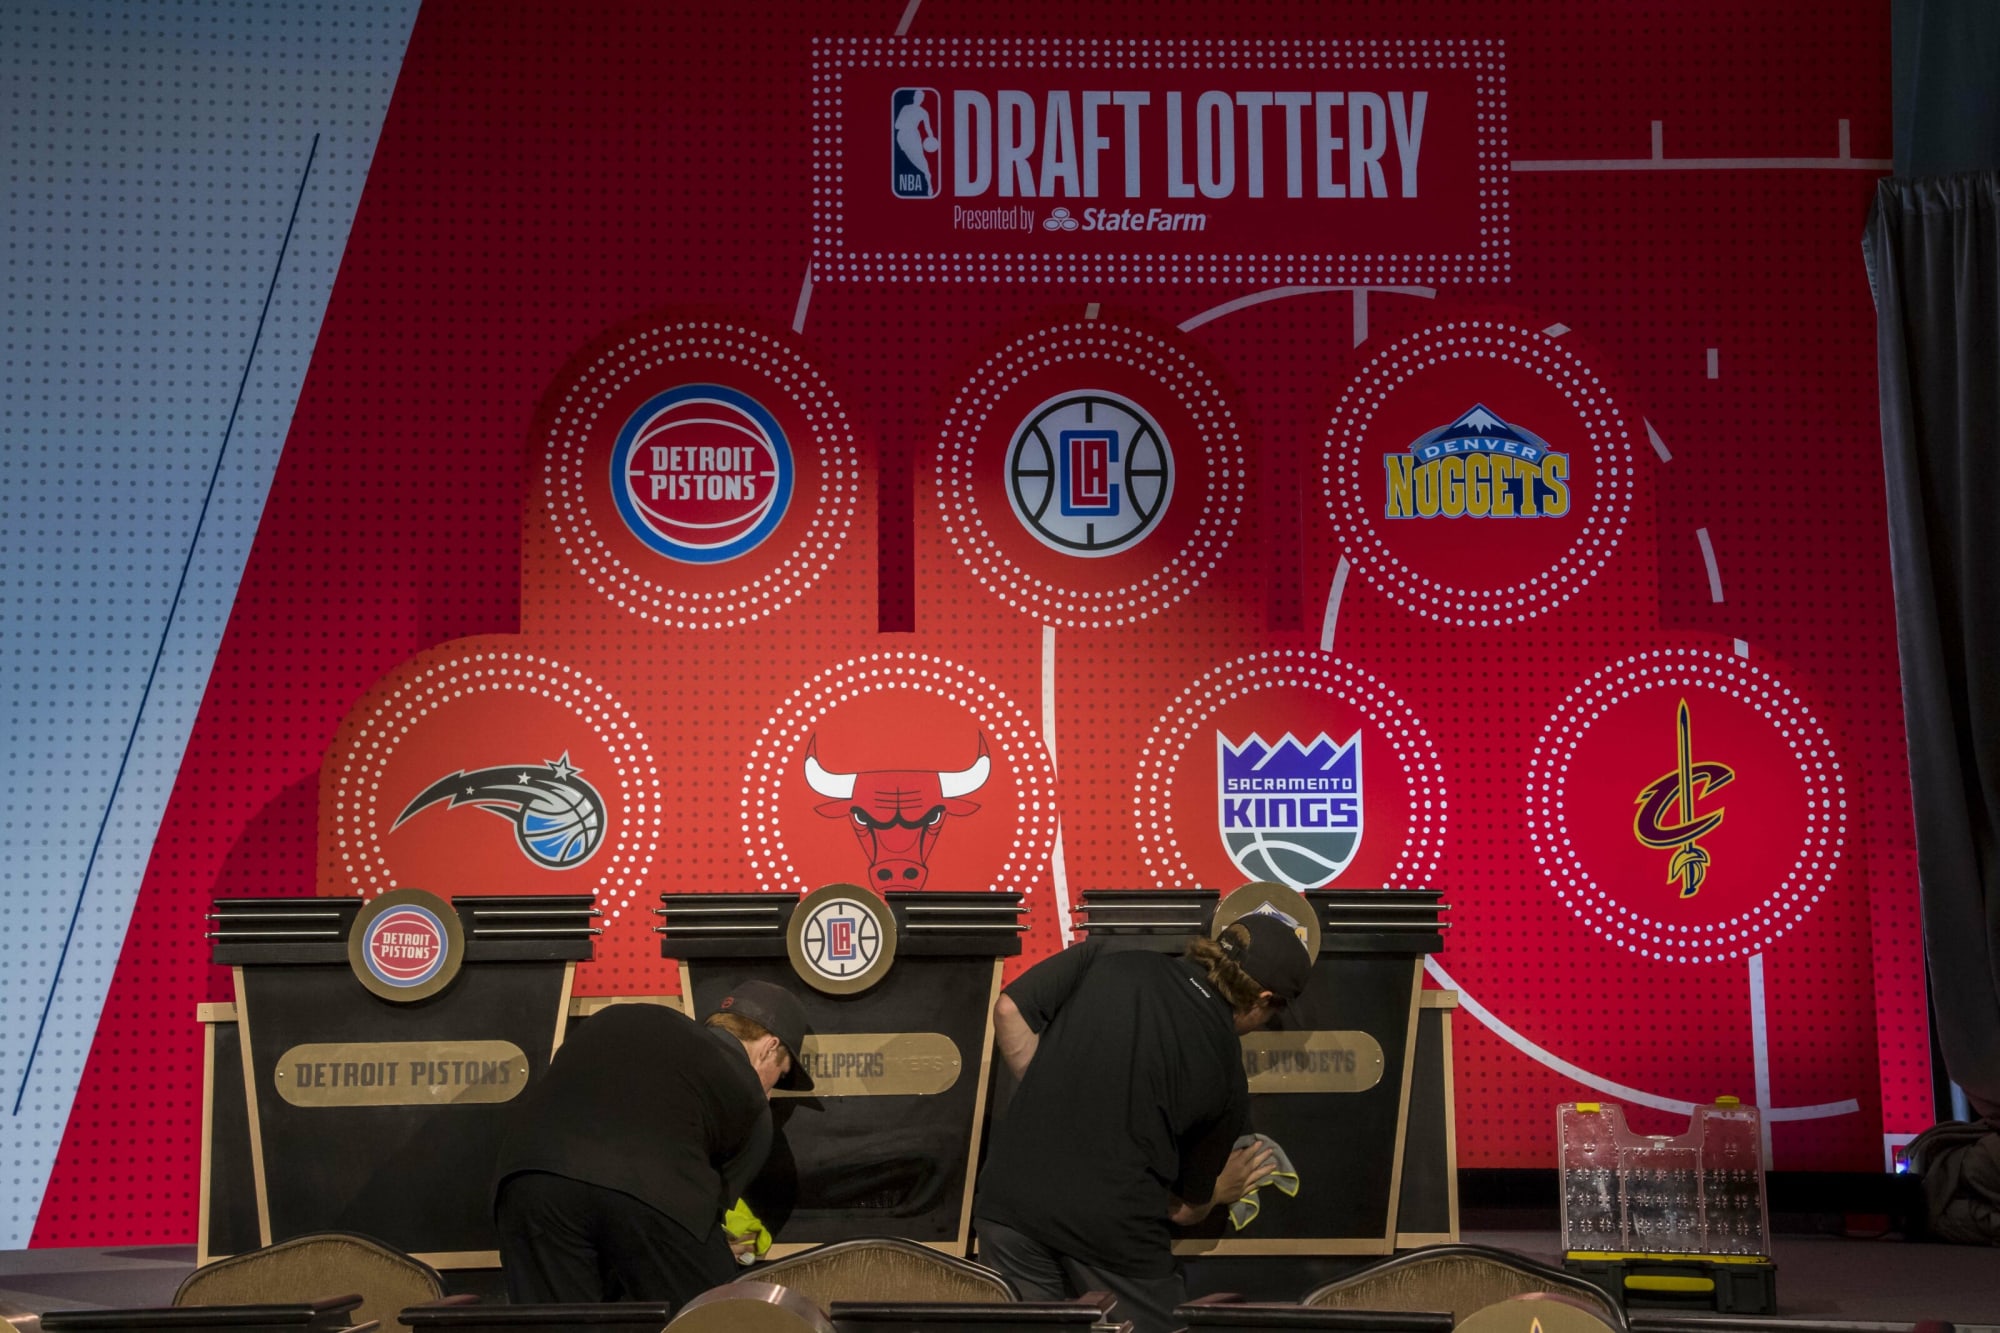 Orlando Magic NBA Draft Lottery: How I stopped worrying and learned to love my Draft position